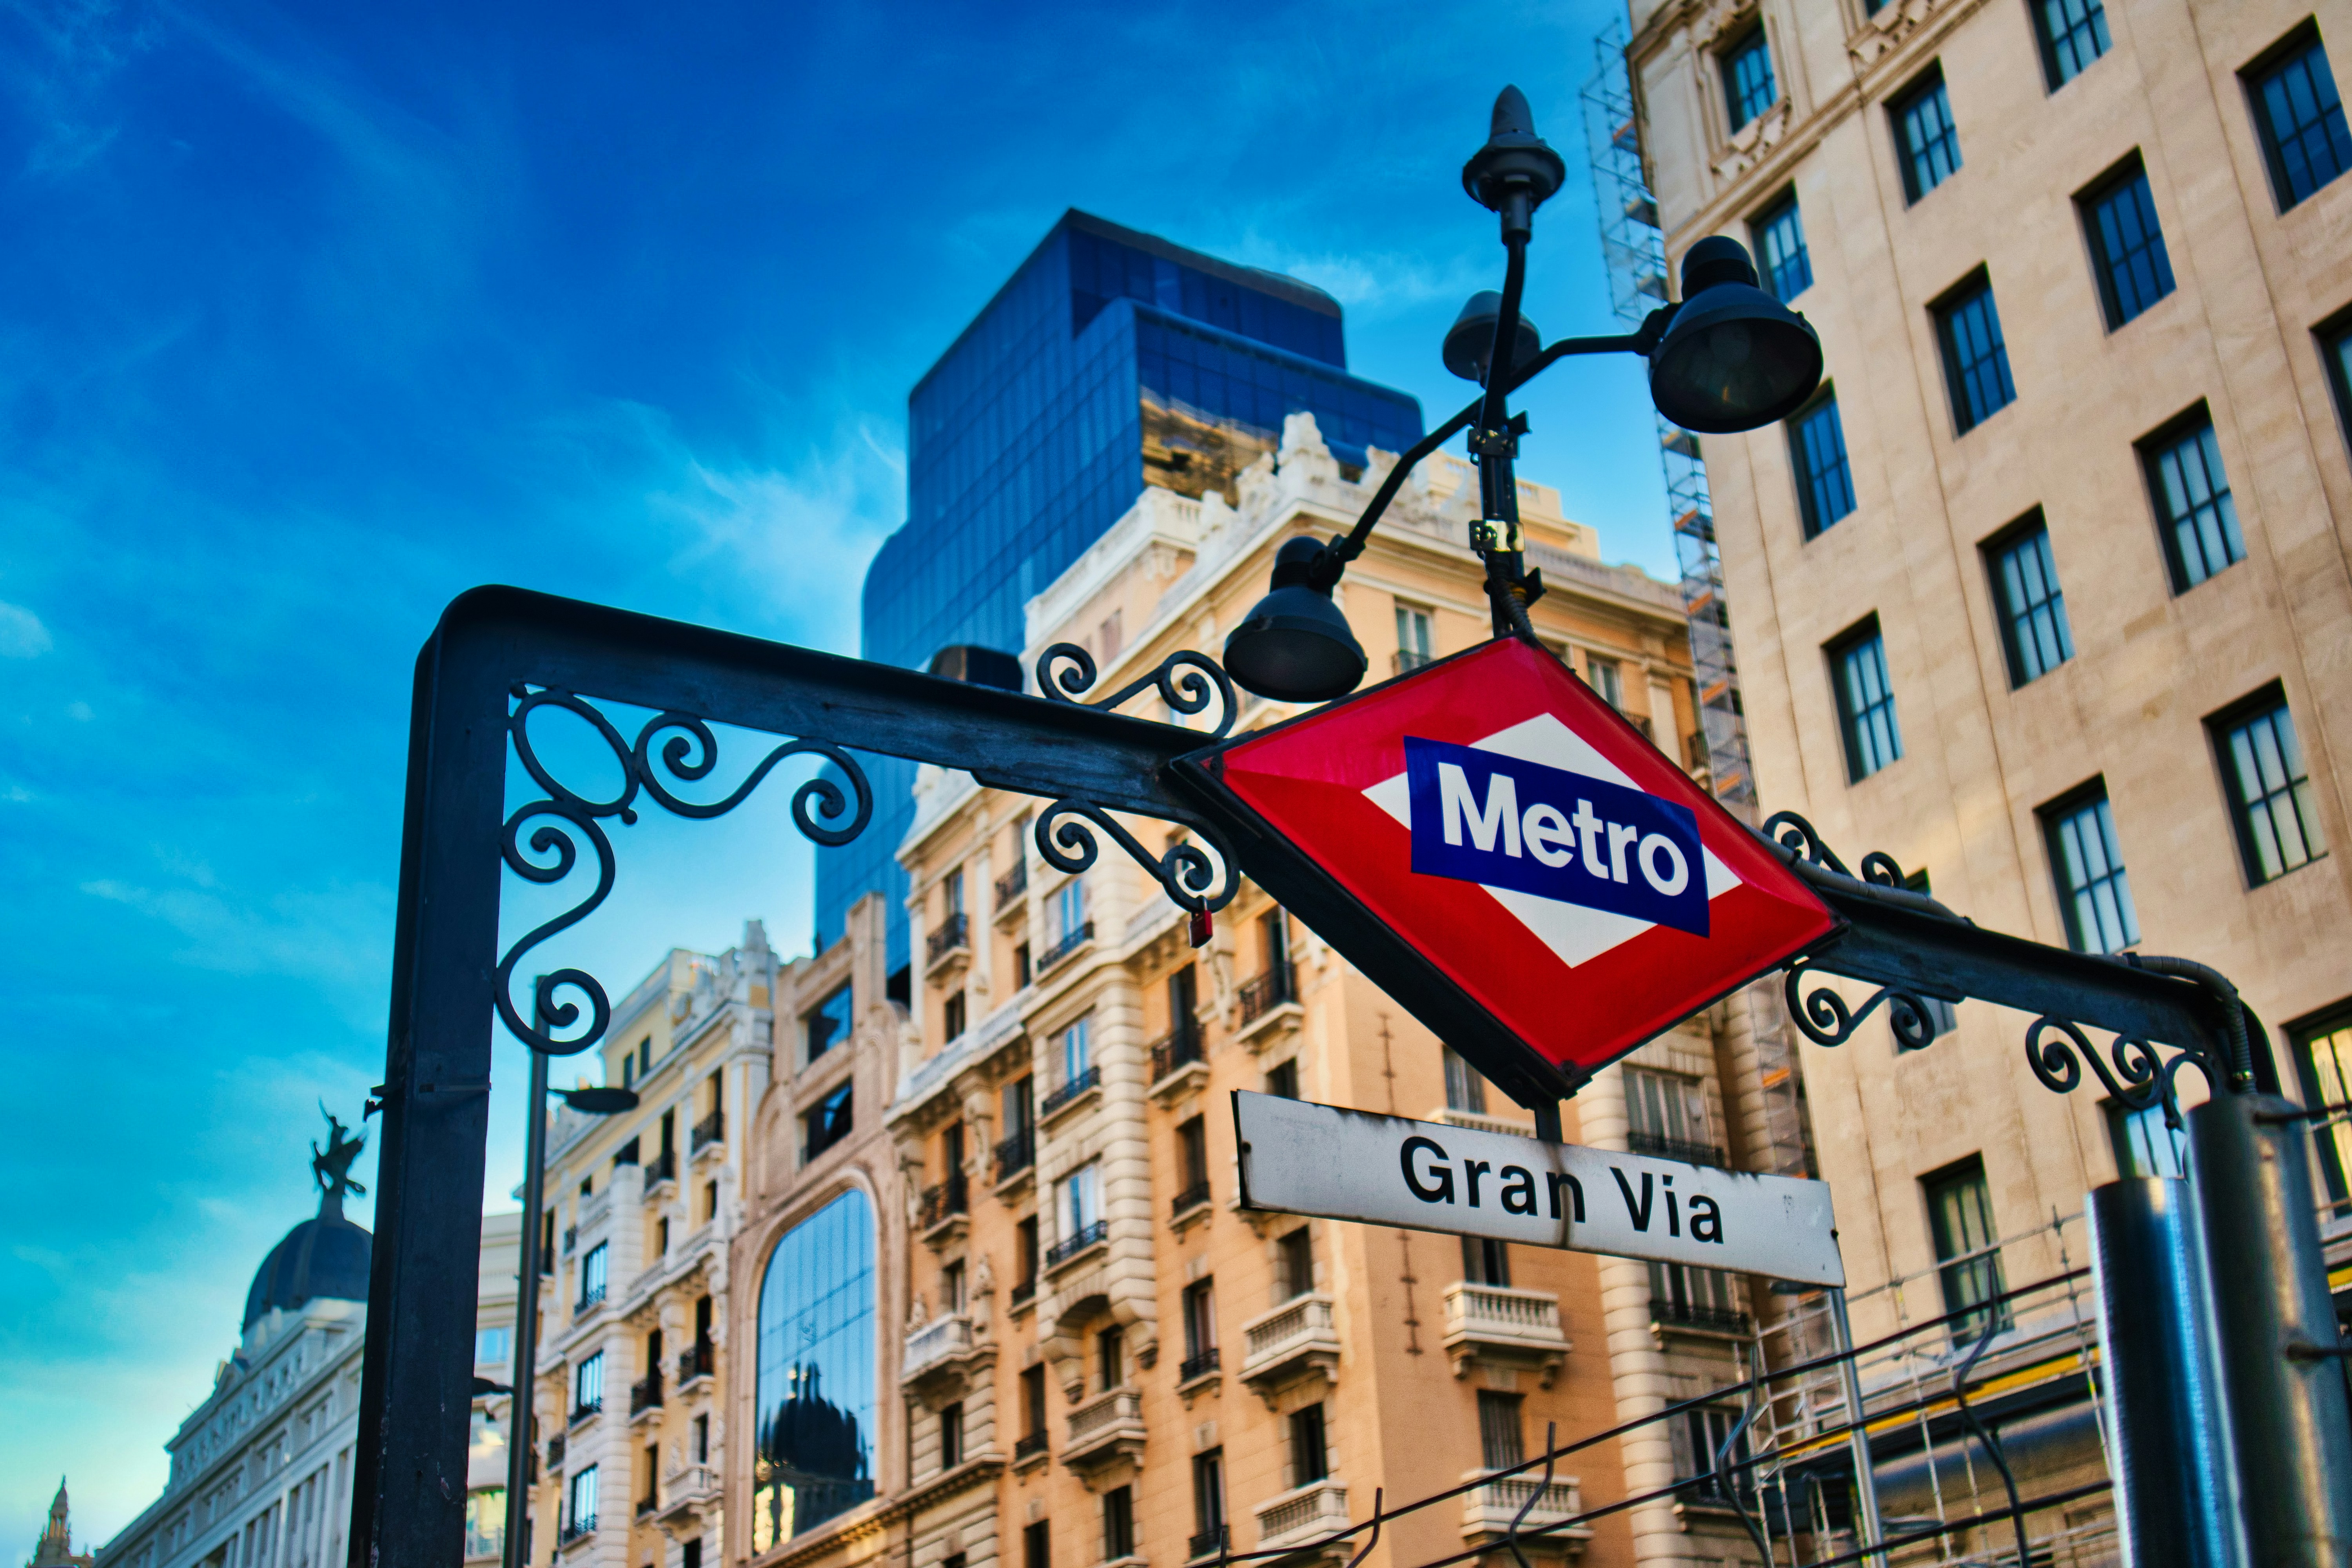 One of the entrances for the Gran Via metro station in Madrid, Spain